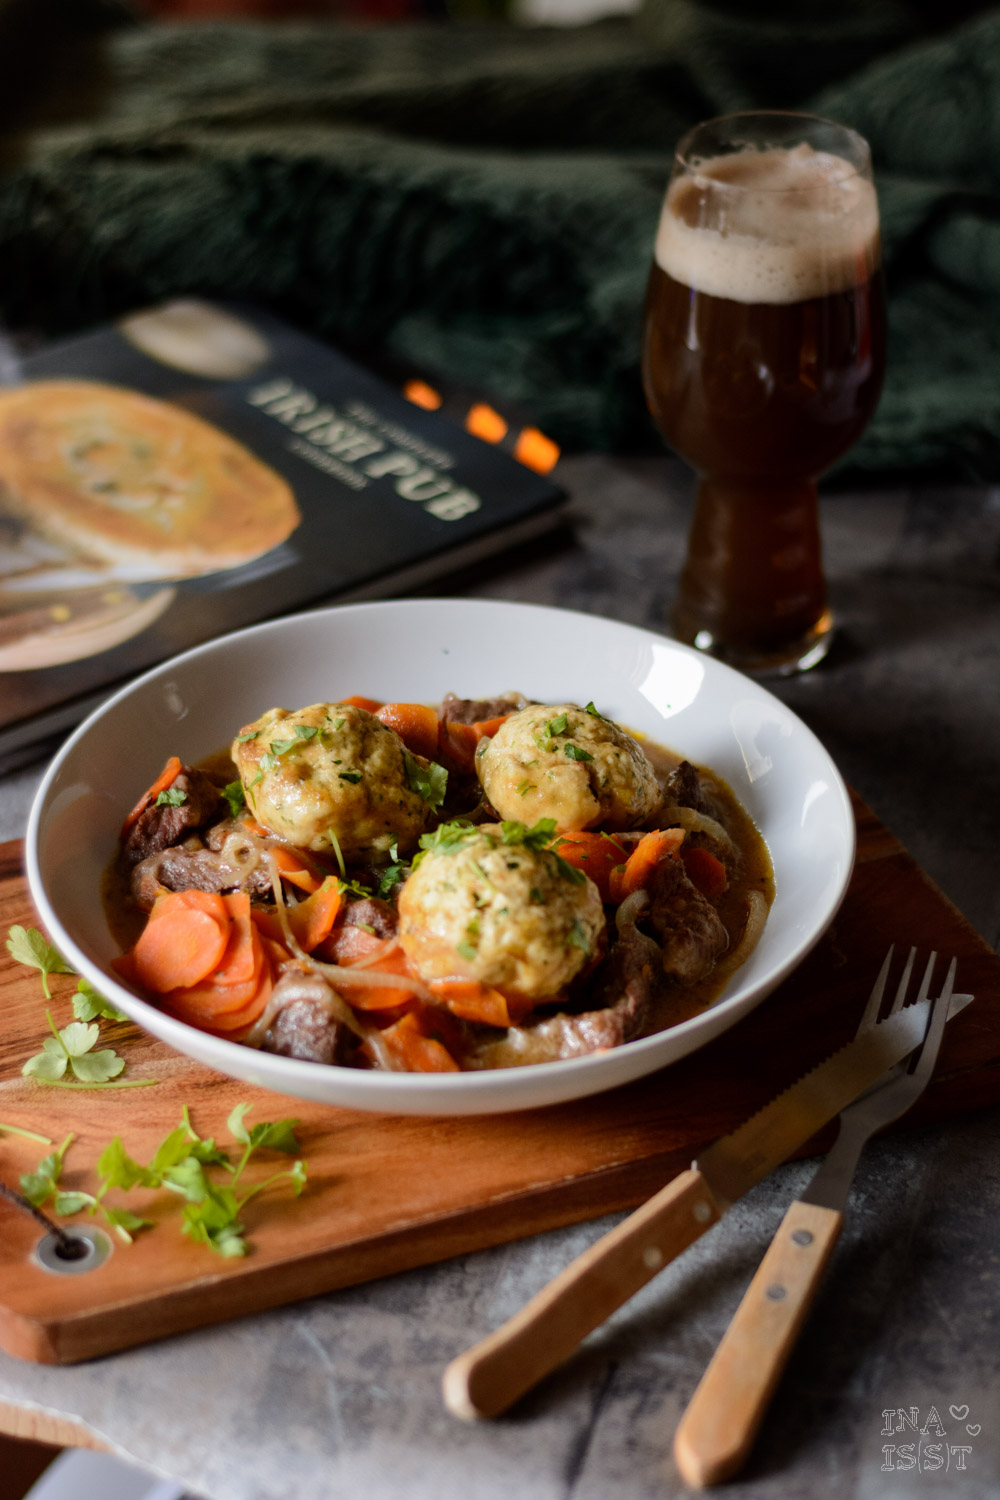 Beef in Stout with Herb Dumplings